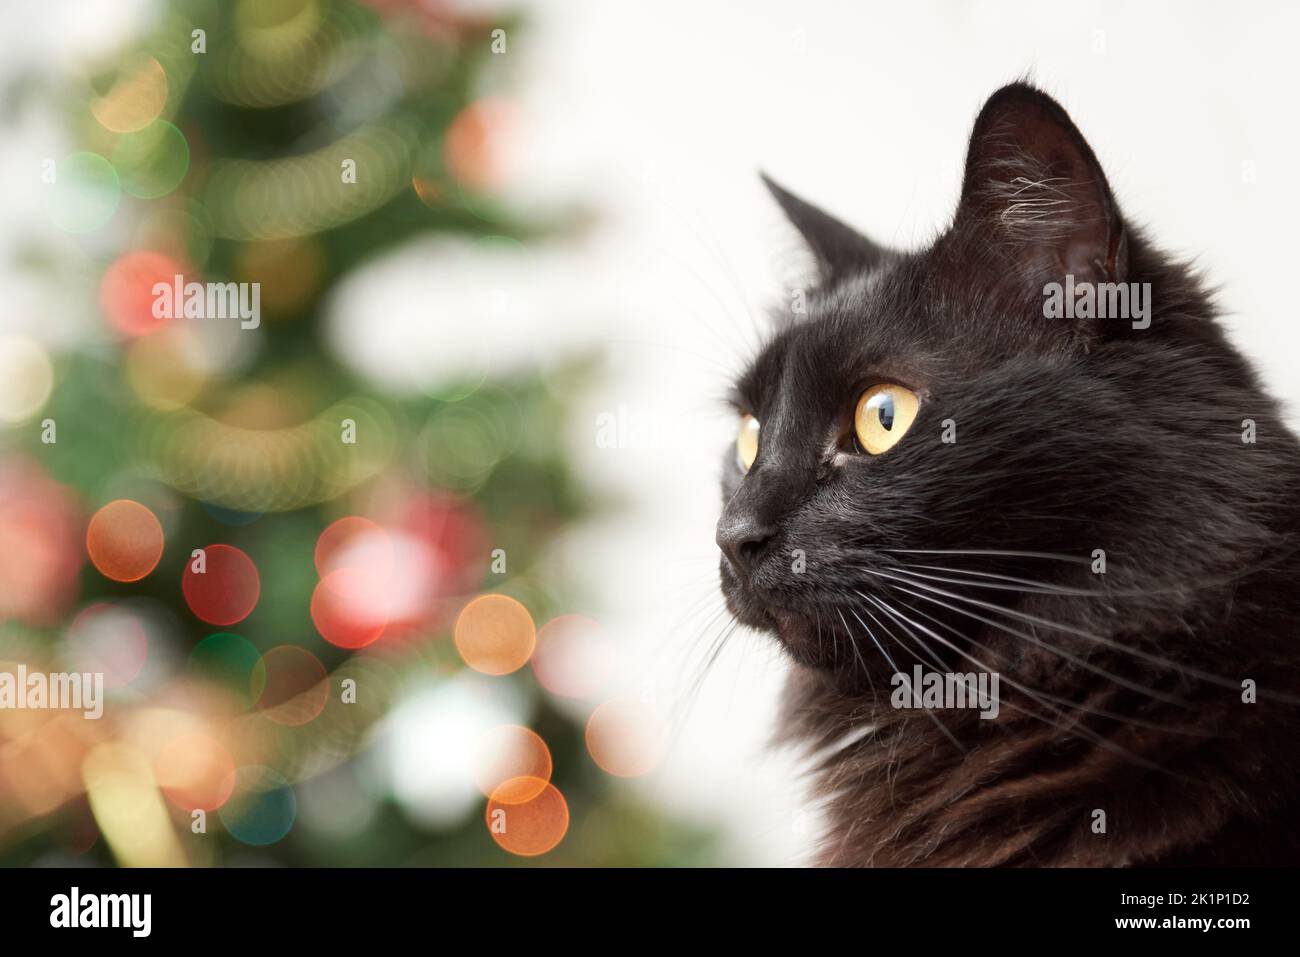 Portrait of cute black cat with a Christmas tree with ornaments and lights in the background. Bright modern image with copy space. Stock Photo